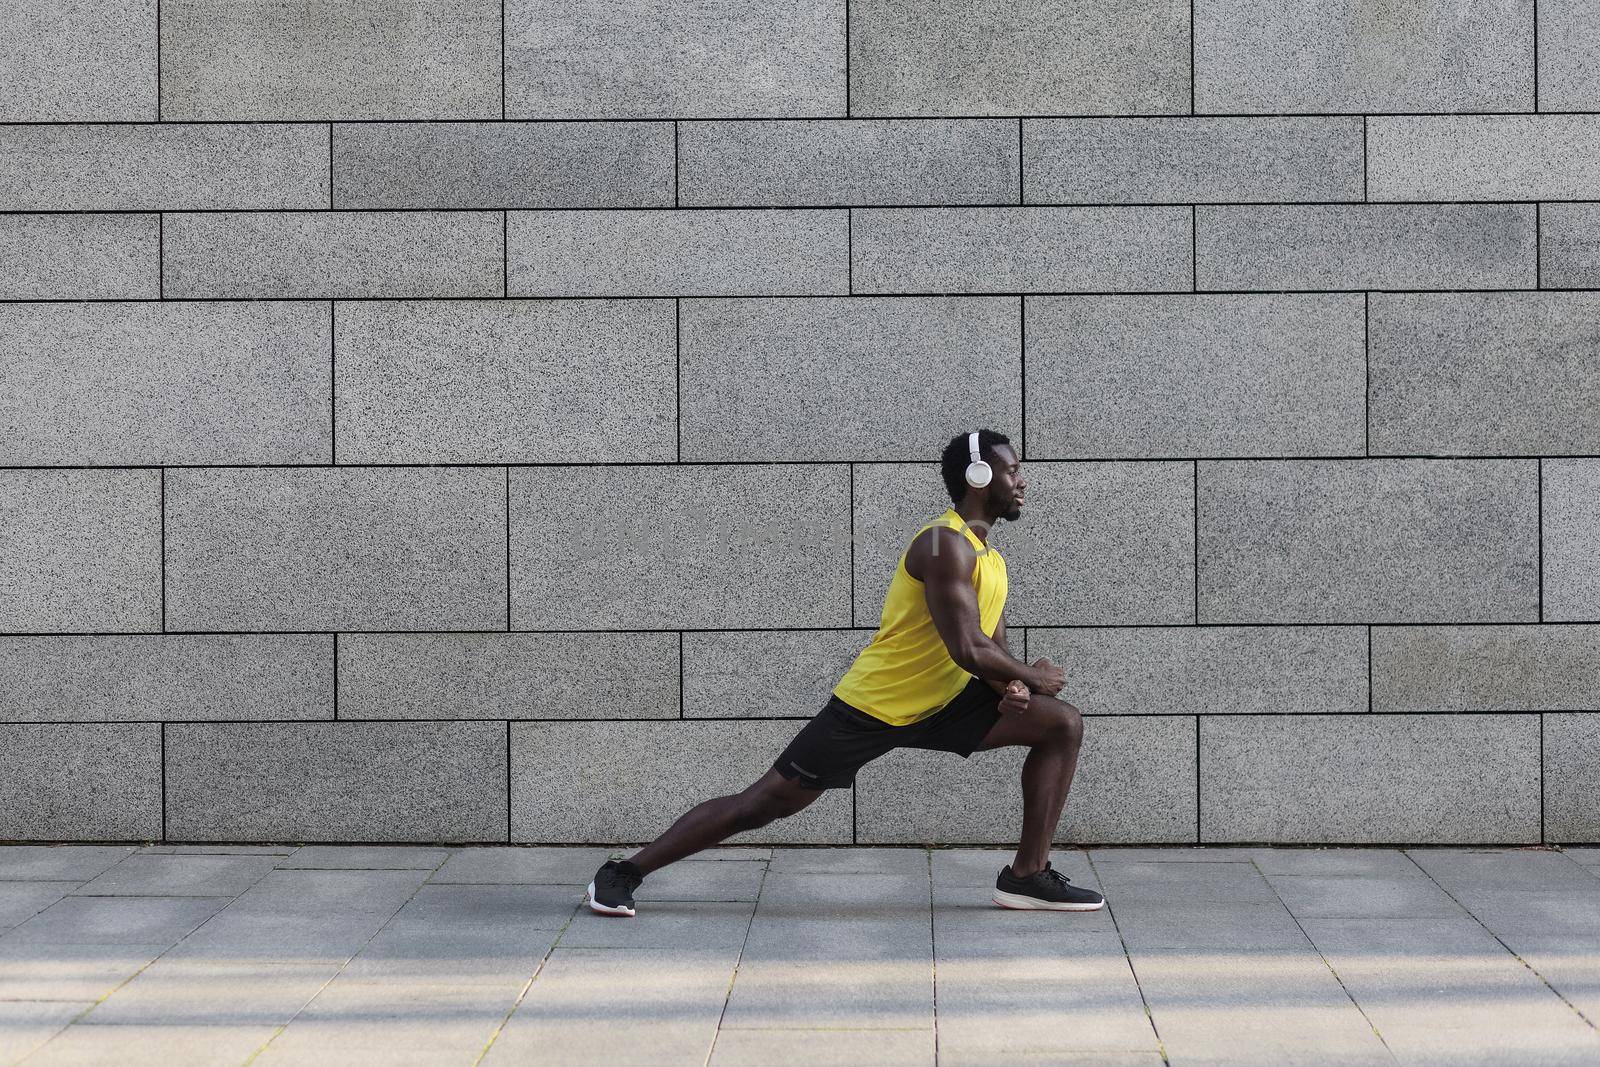 Fitness and health concept. Afro american jogger doing stretching after morning workout.